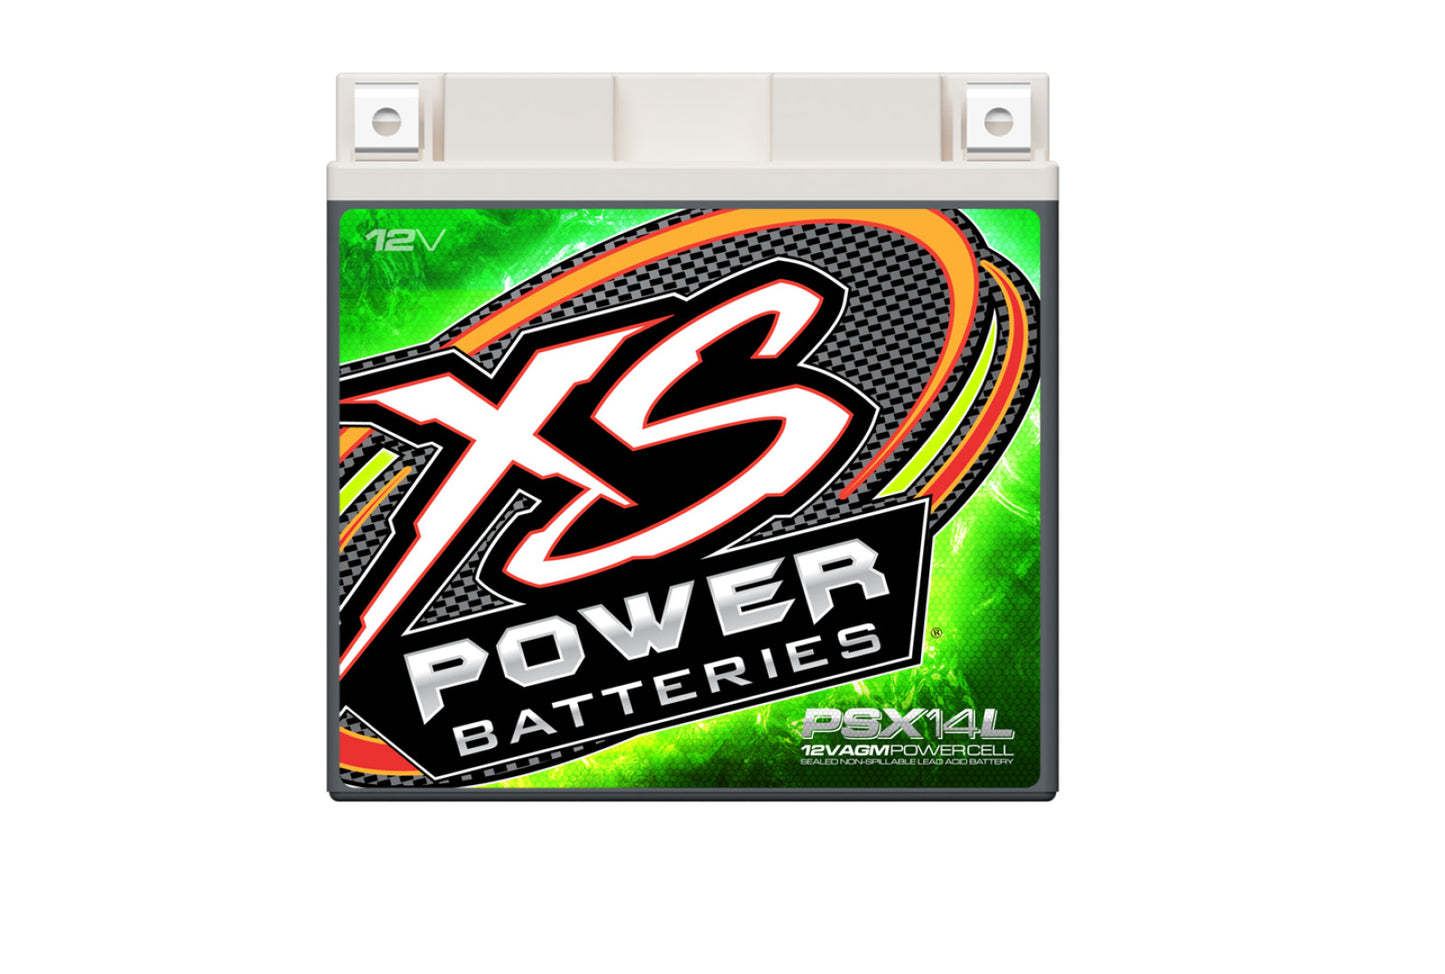 XS Power Batteries 12V AGM Powersports Series Batteries - M6 Terminal Bolts Included 800 Max Amps